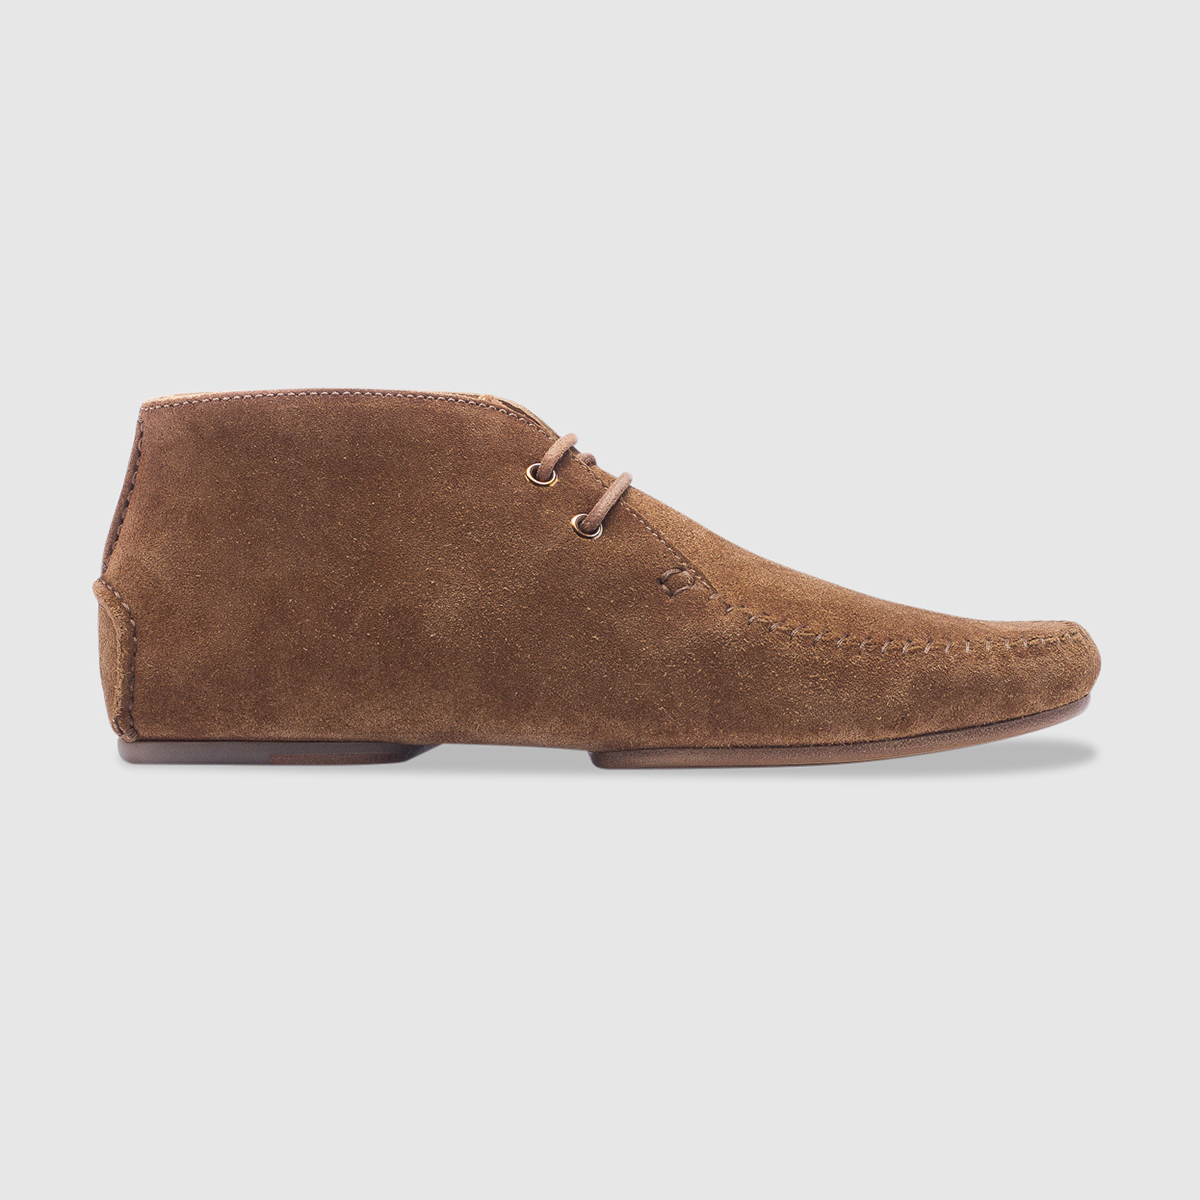 Lace-up unlined desert boot in suede – umber Calò on sale 2022